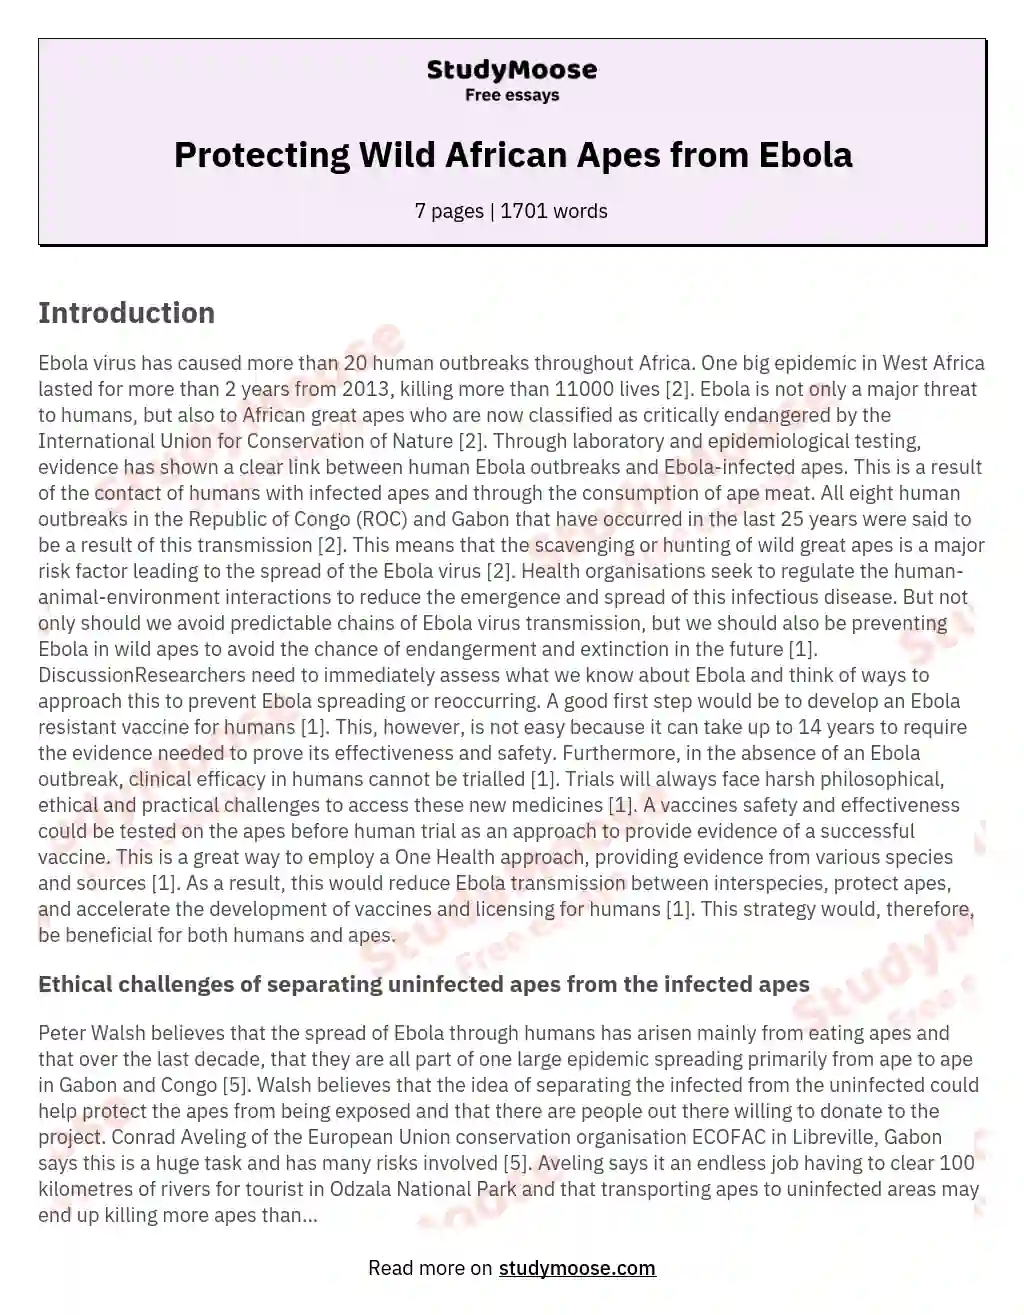 Protecting Wild African Apes from Ebola essay